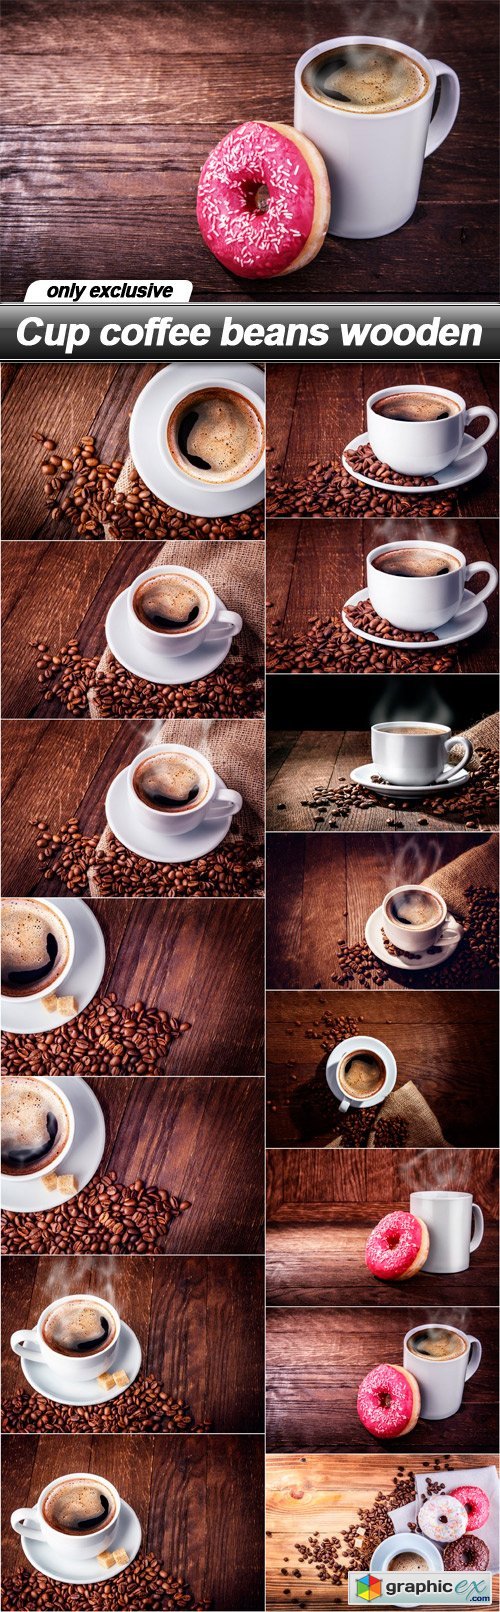 Cup coffee beans wooden - 15 UHQ JPEG